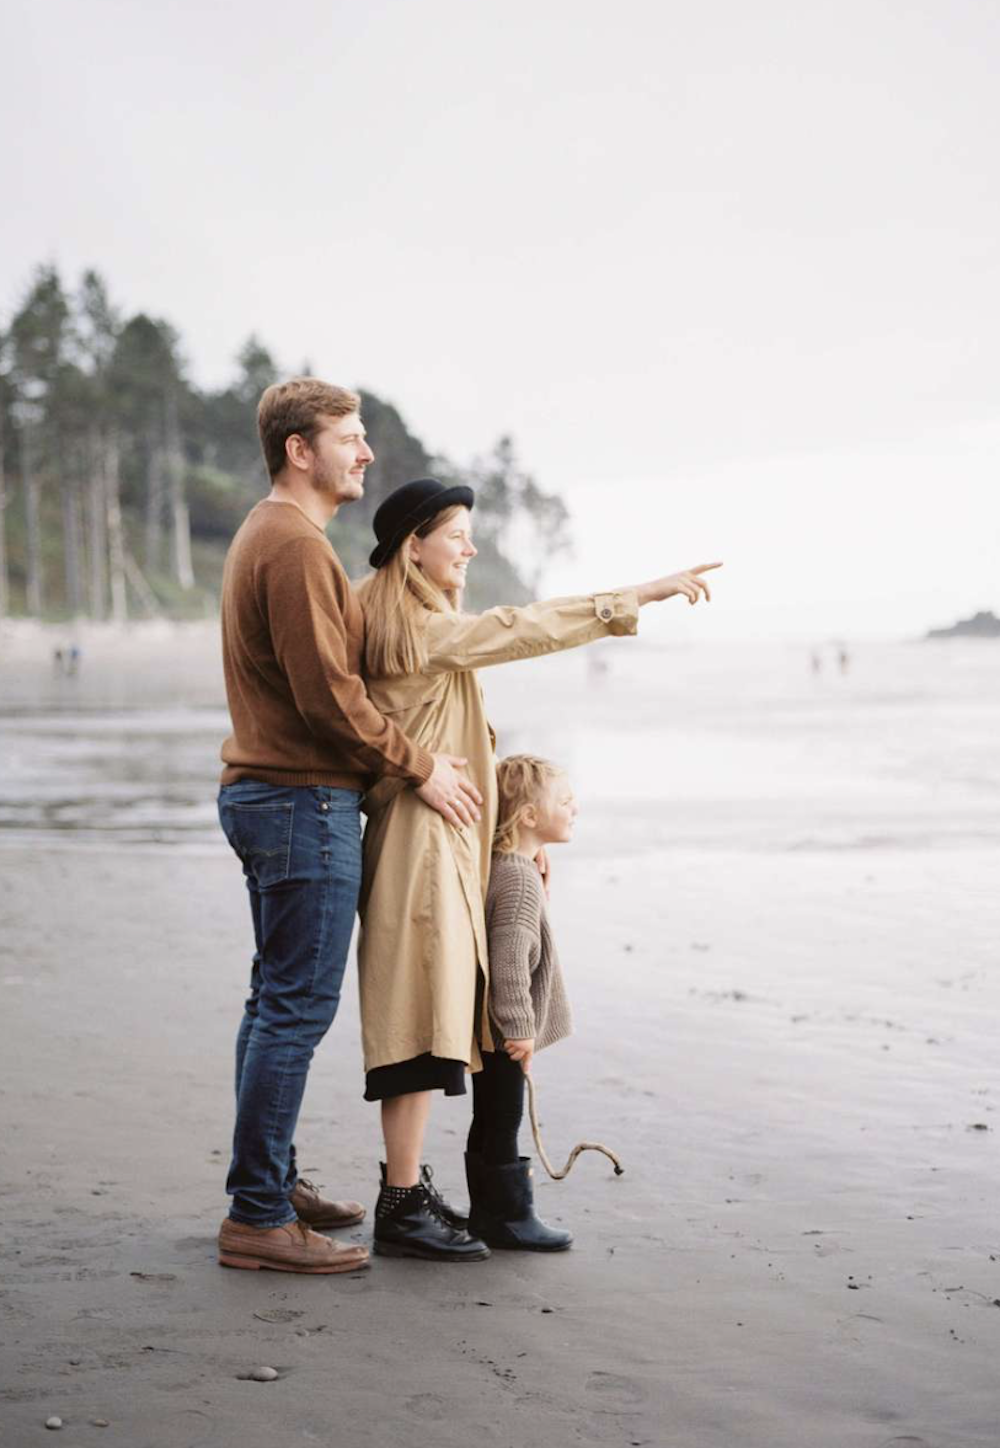 image of a family with a dad, mom, and small child wearing neutral clothing and boots standing on the beach looking out to the water in the fall